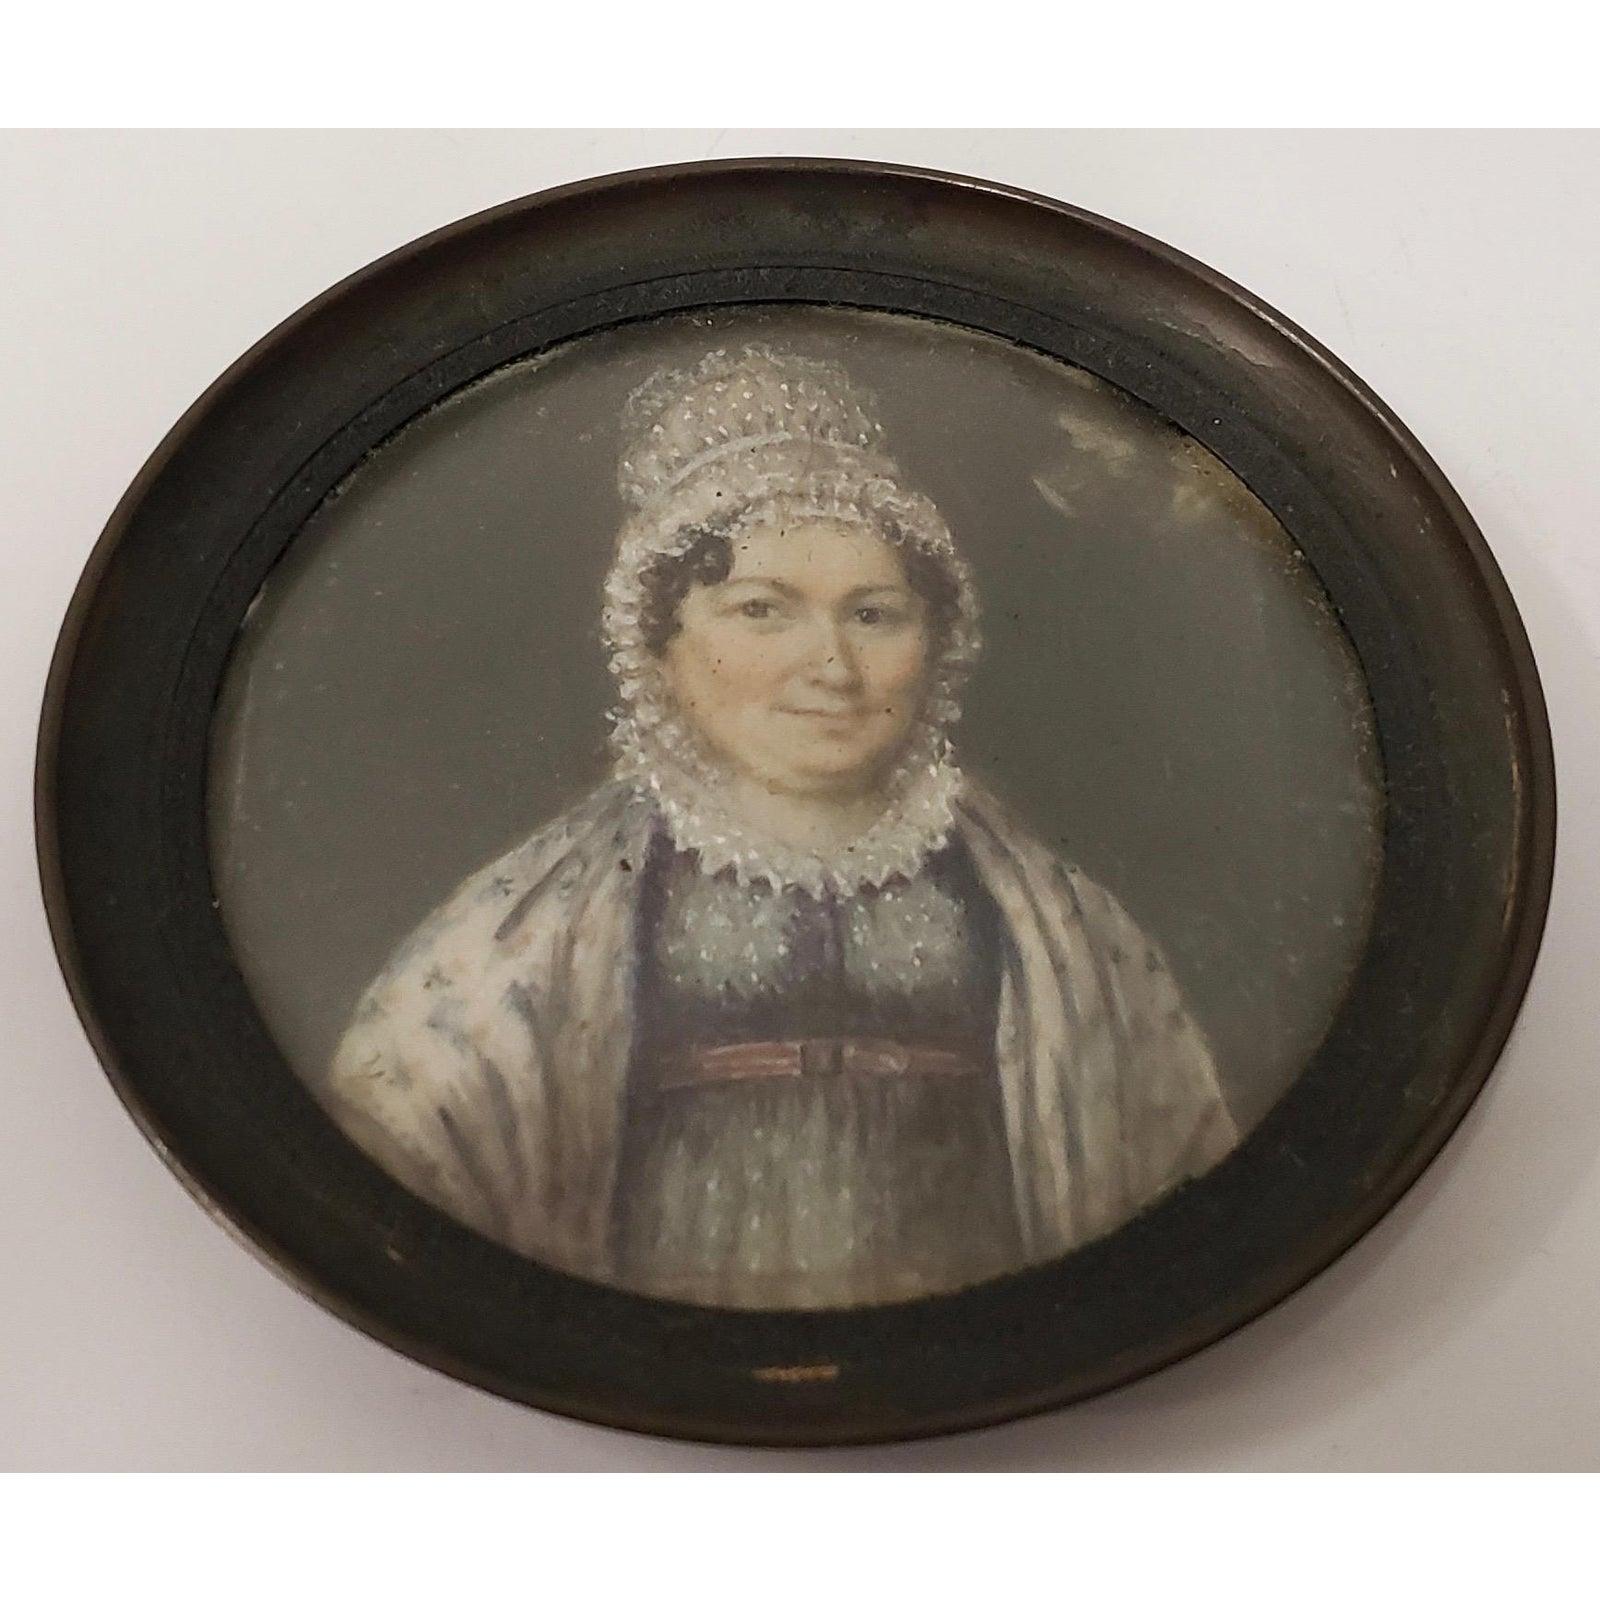 Fine Mid 19th Century Portrait Miniature of a Woman Wearing a Lace Bonnet - Painting by Unknown